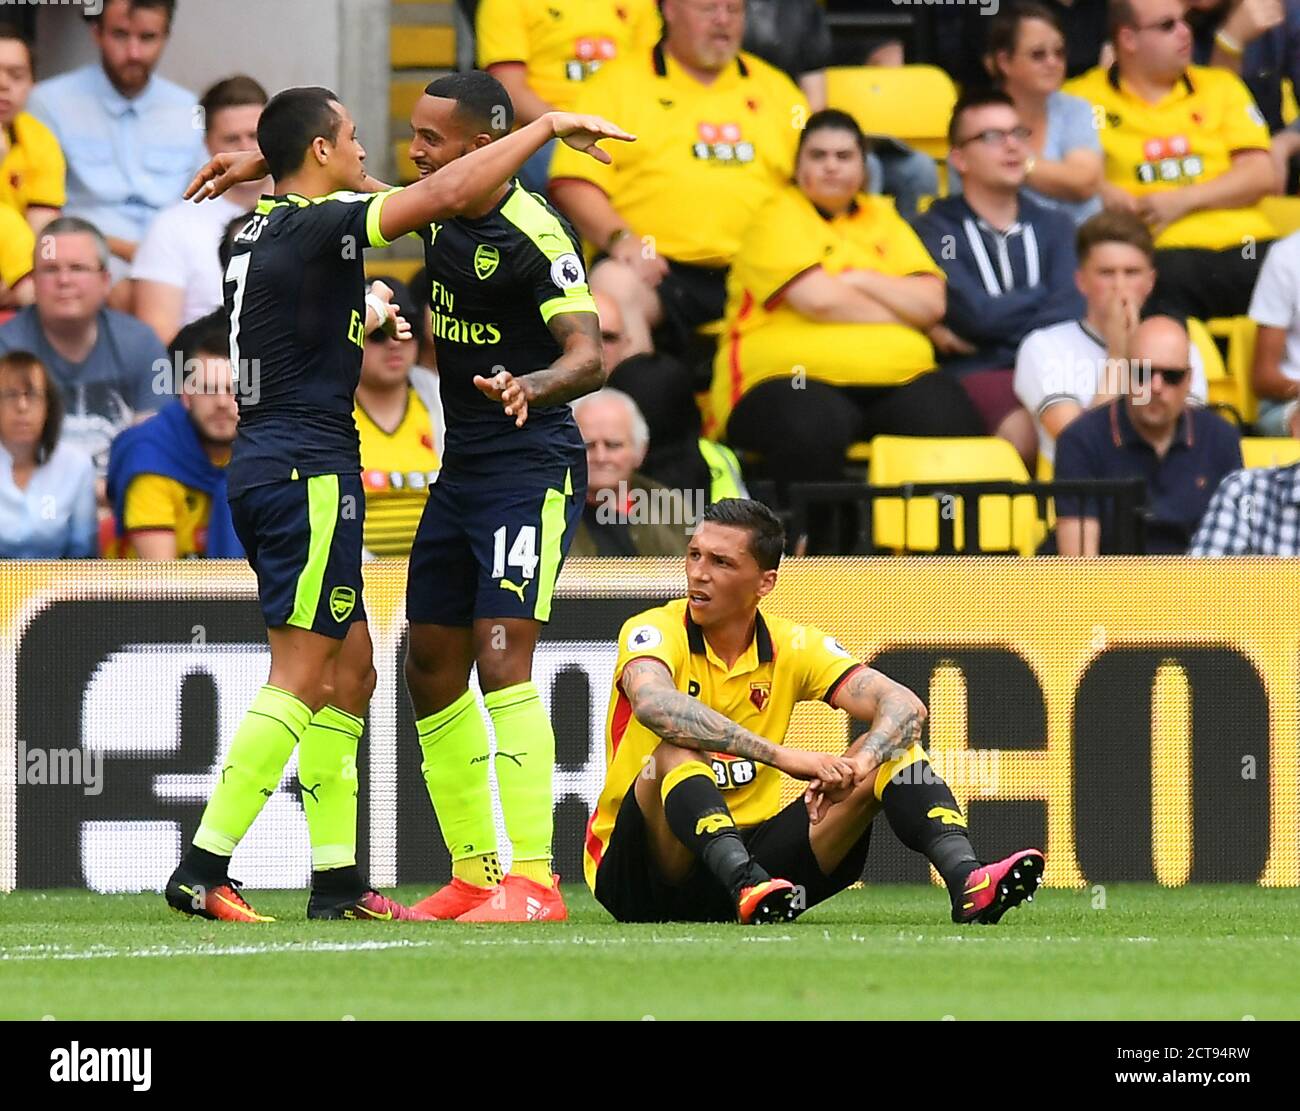 ALEXIS SANCHEZ CELEBRATES SCORING HIS HEADED GOAL FOR ARSENAL WITH THEO WALCOTT AND IT IS CONFIRMED TO HAVE CROSSED THE LINE BY GOAL-LINE TECHNOLOGY Stock Photo